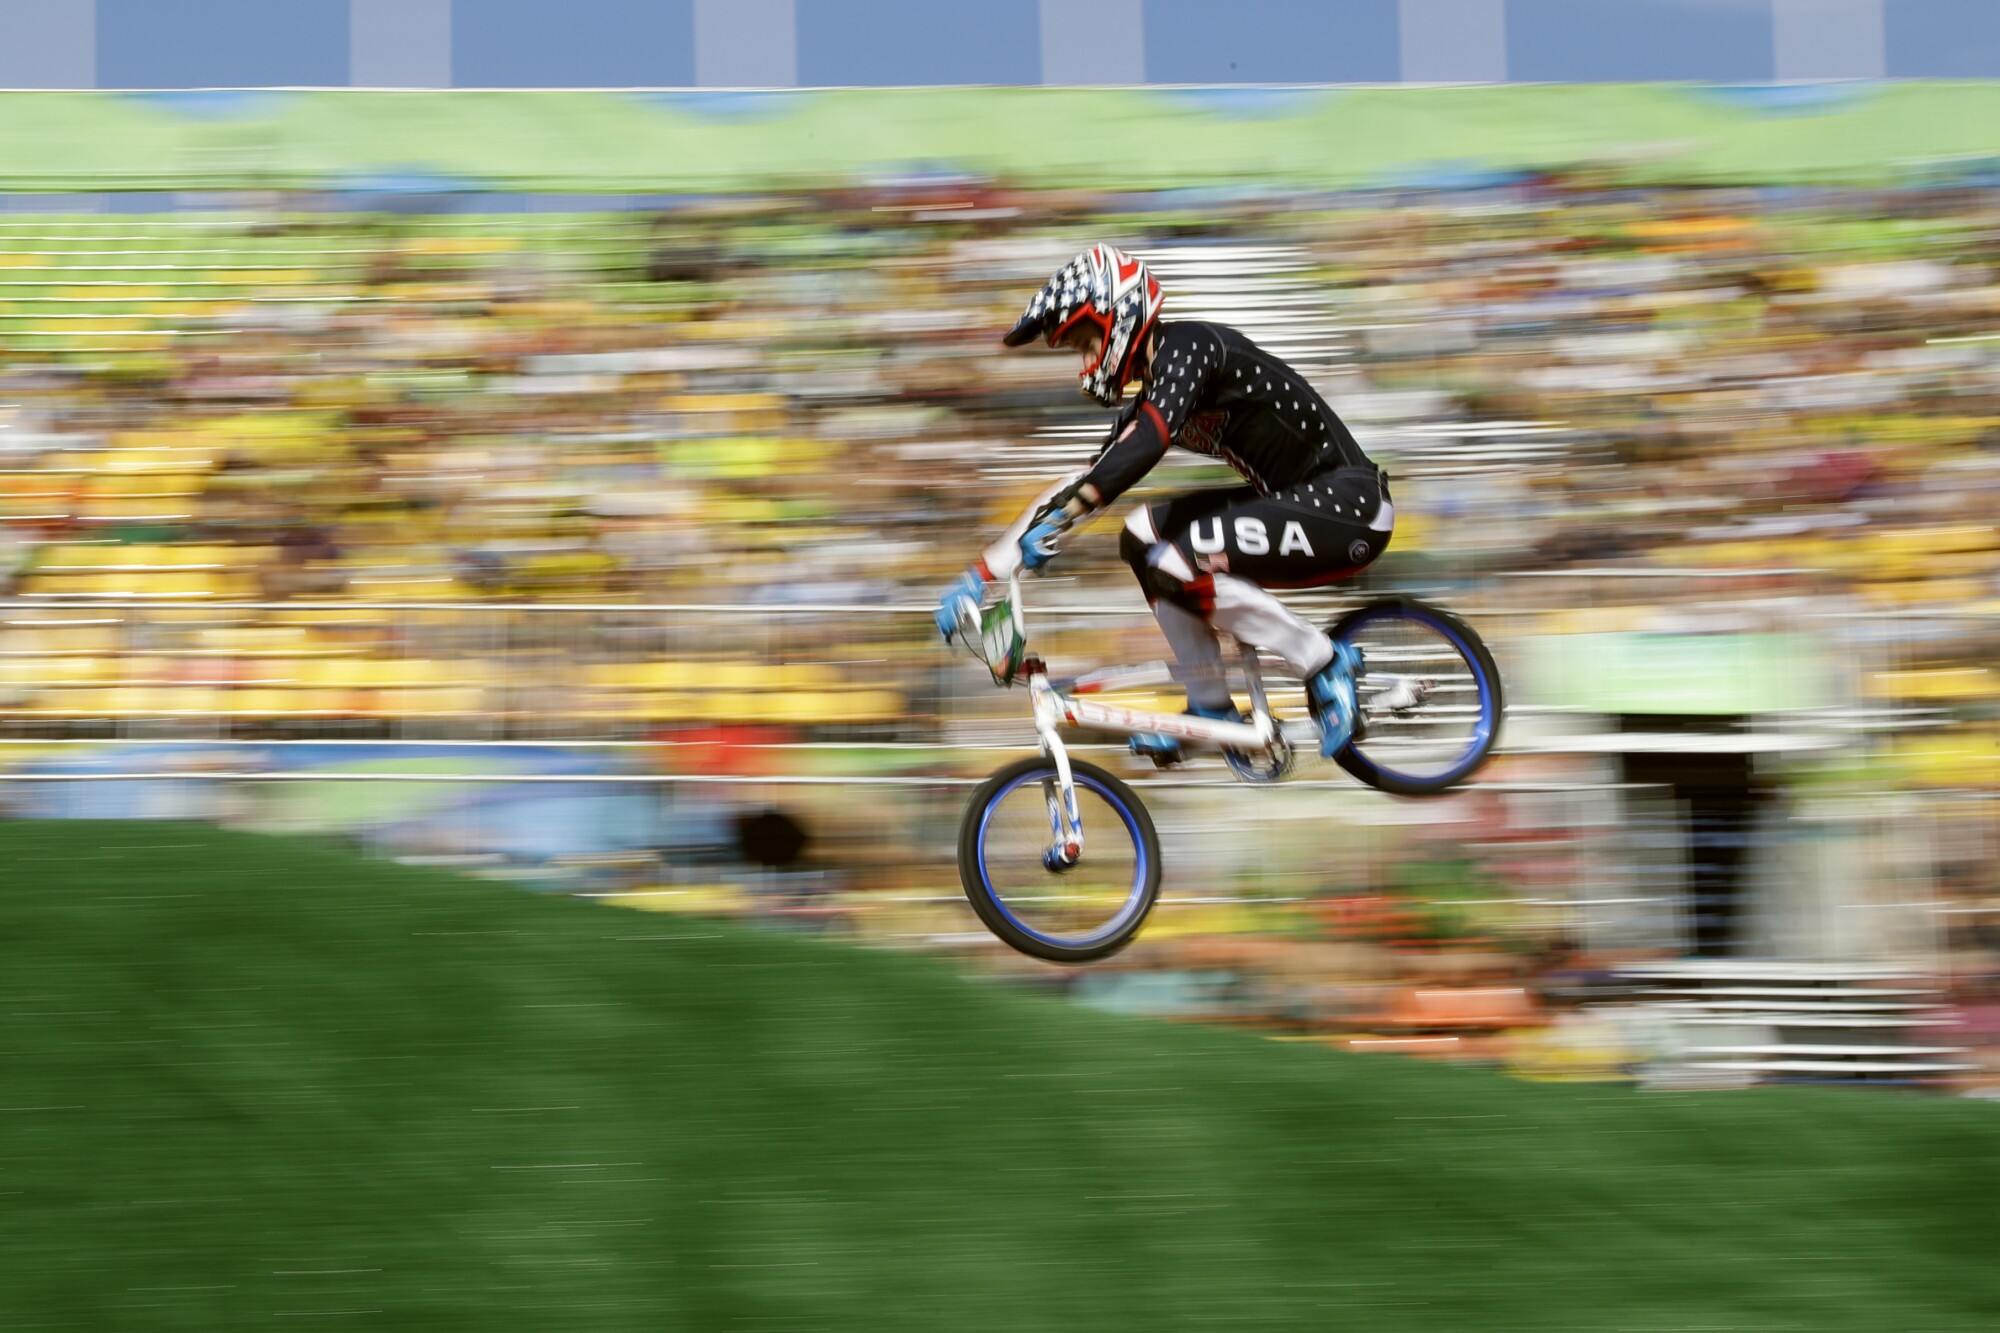 A BMX rider flies against a blurred backdrop of seating stands. 